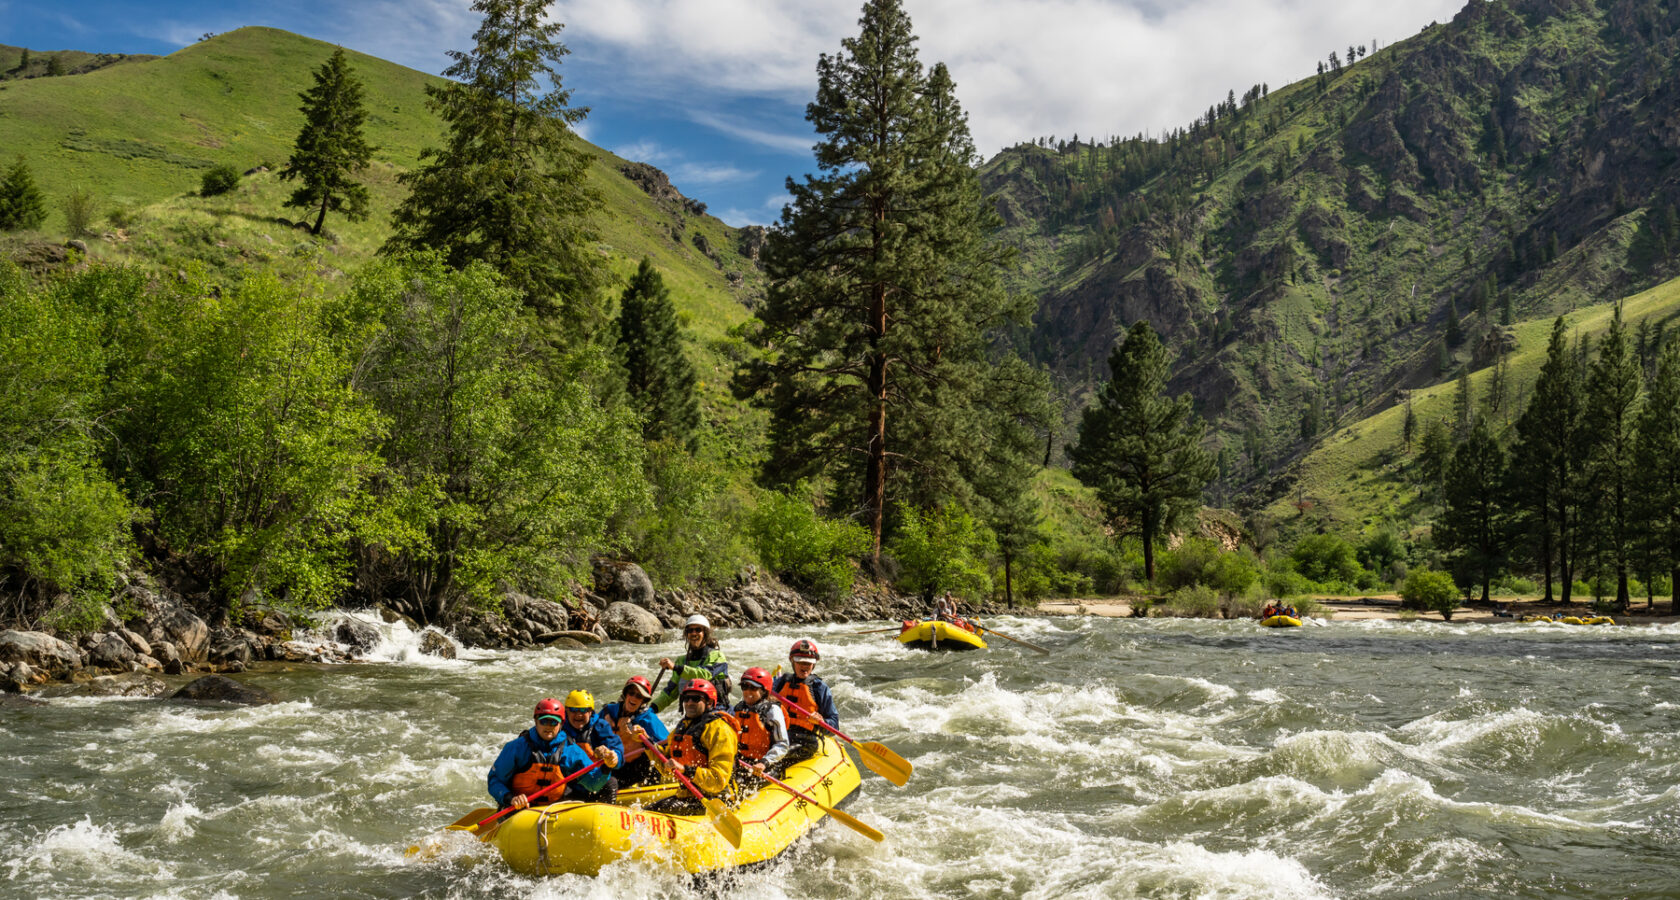 Rafters on the Middle Fork of the Salmon River June 2022